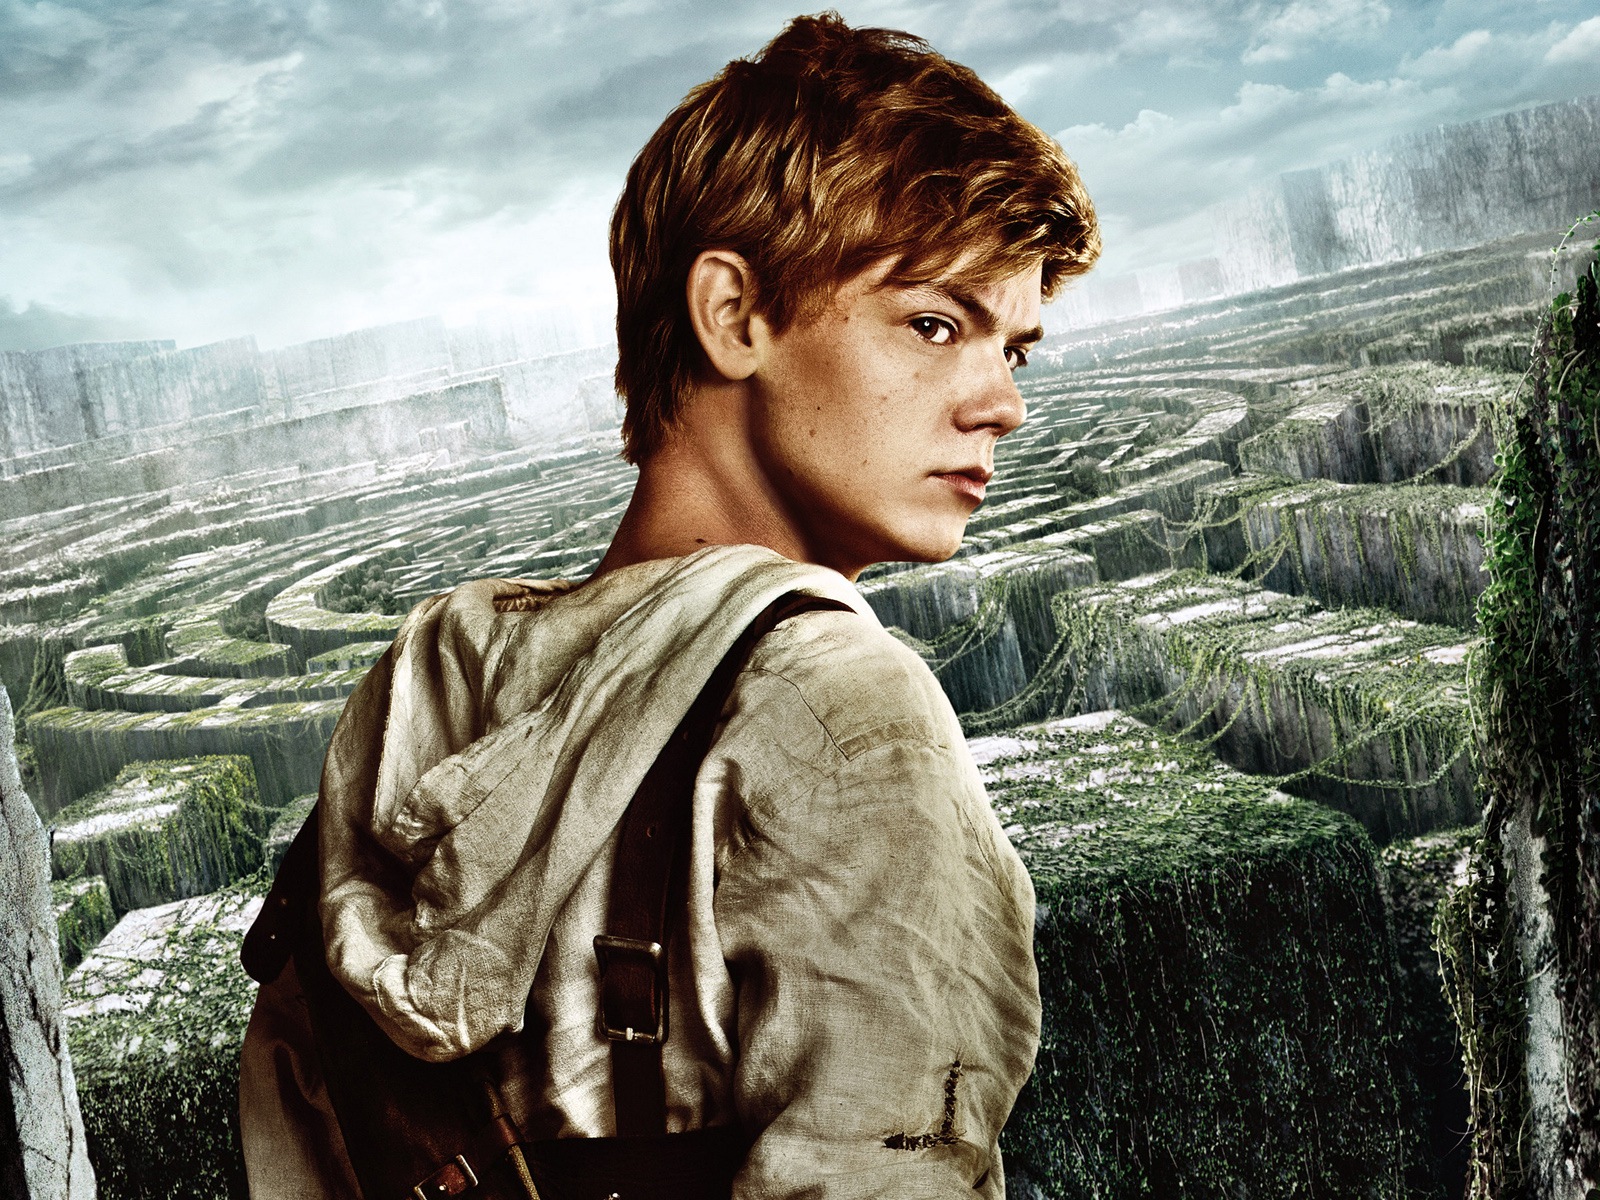 The Maze Runner HD movie wallpapers #8 - 1600x1200